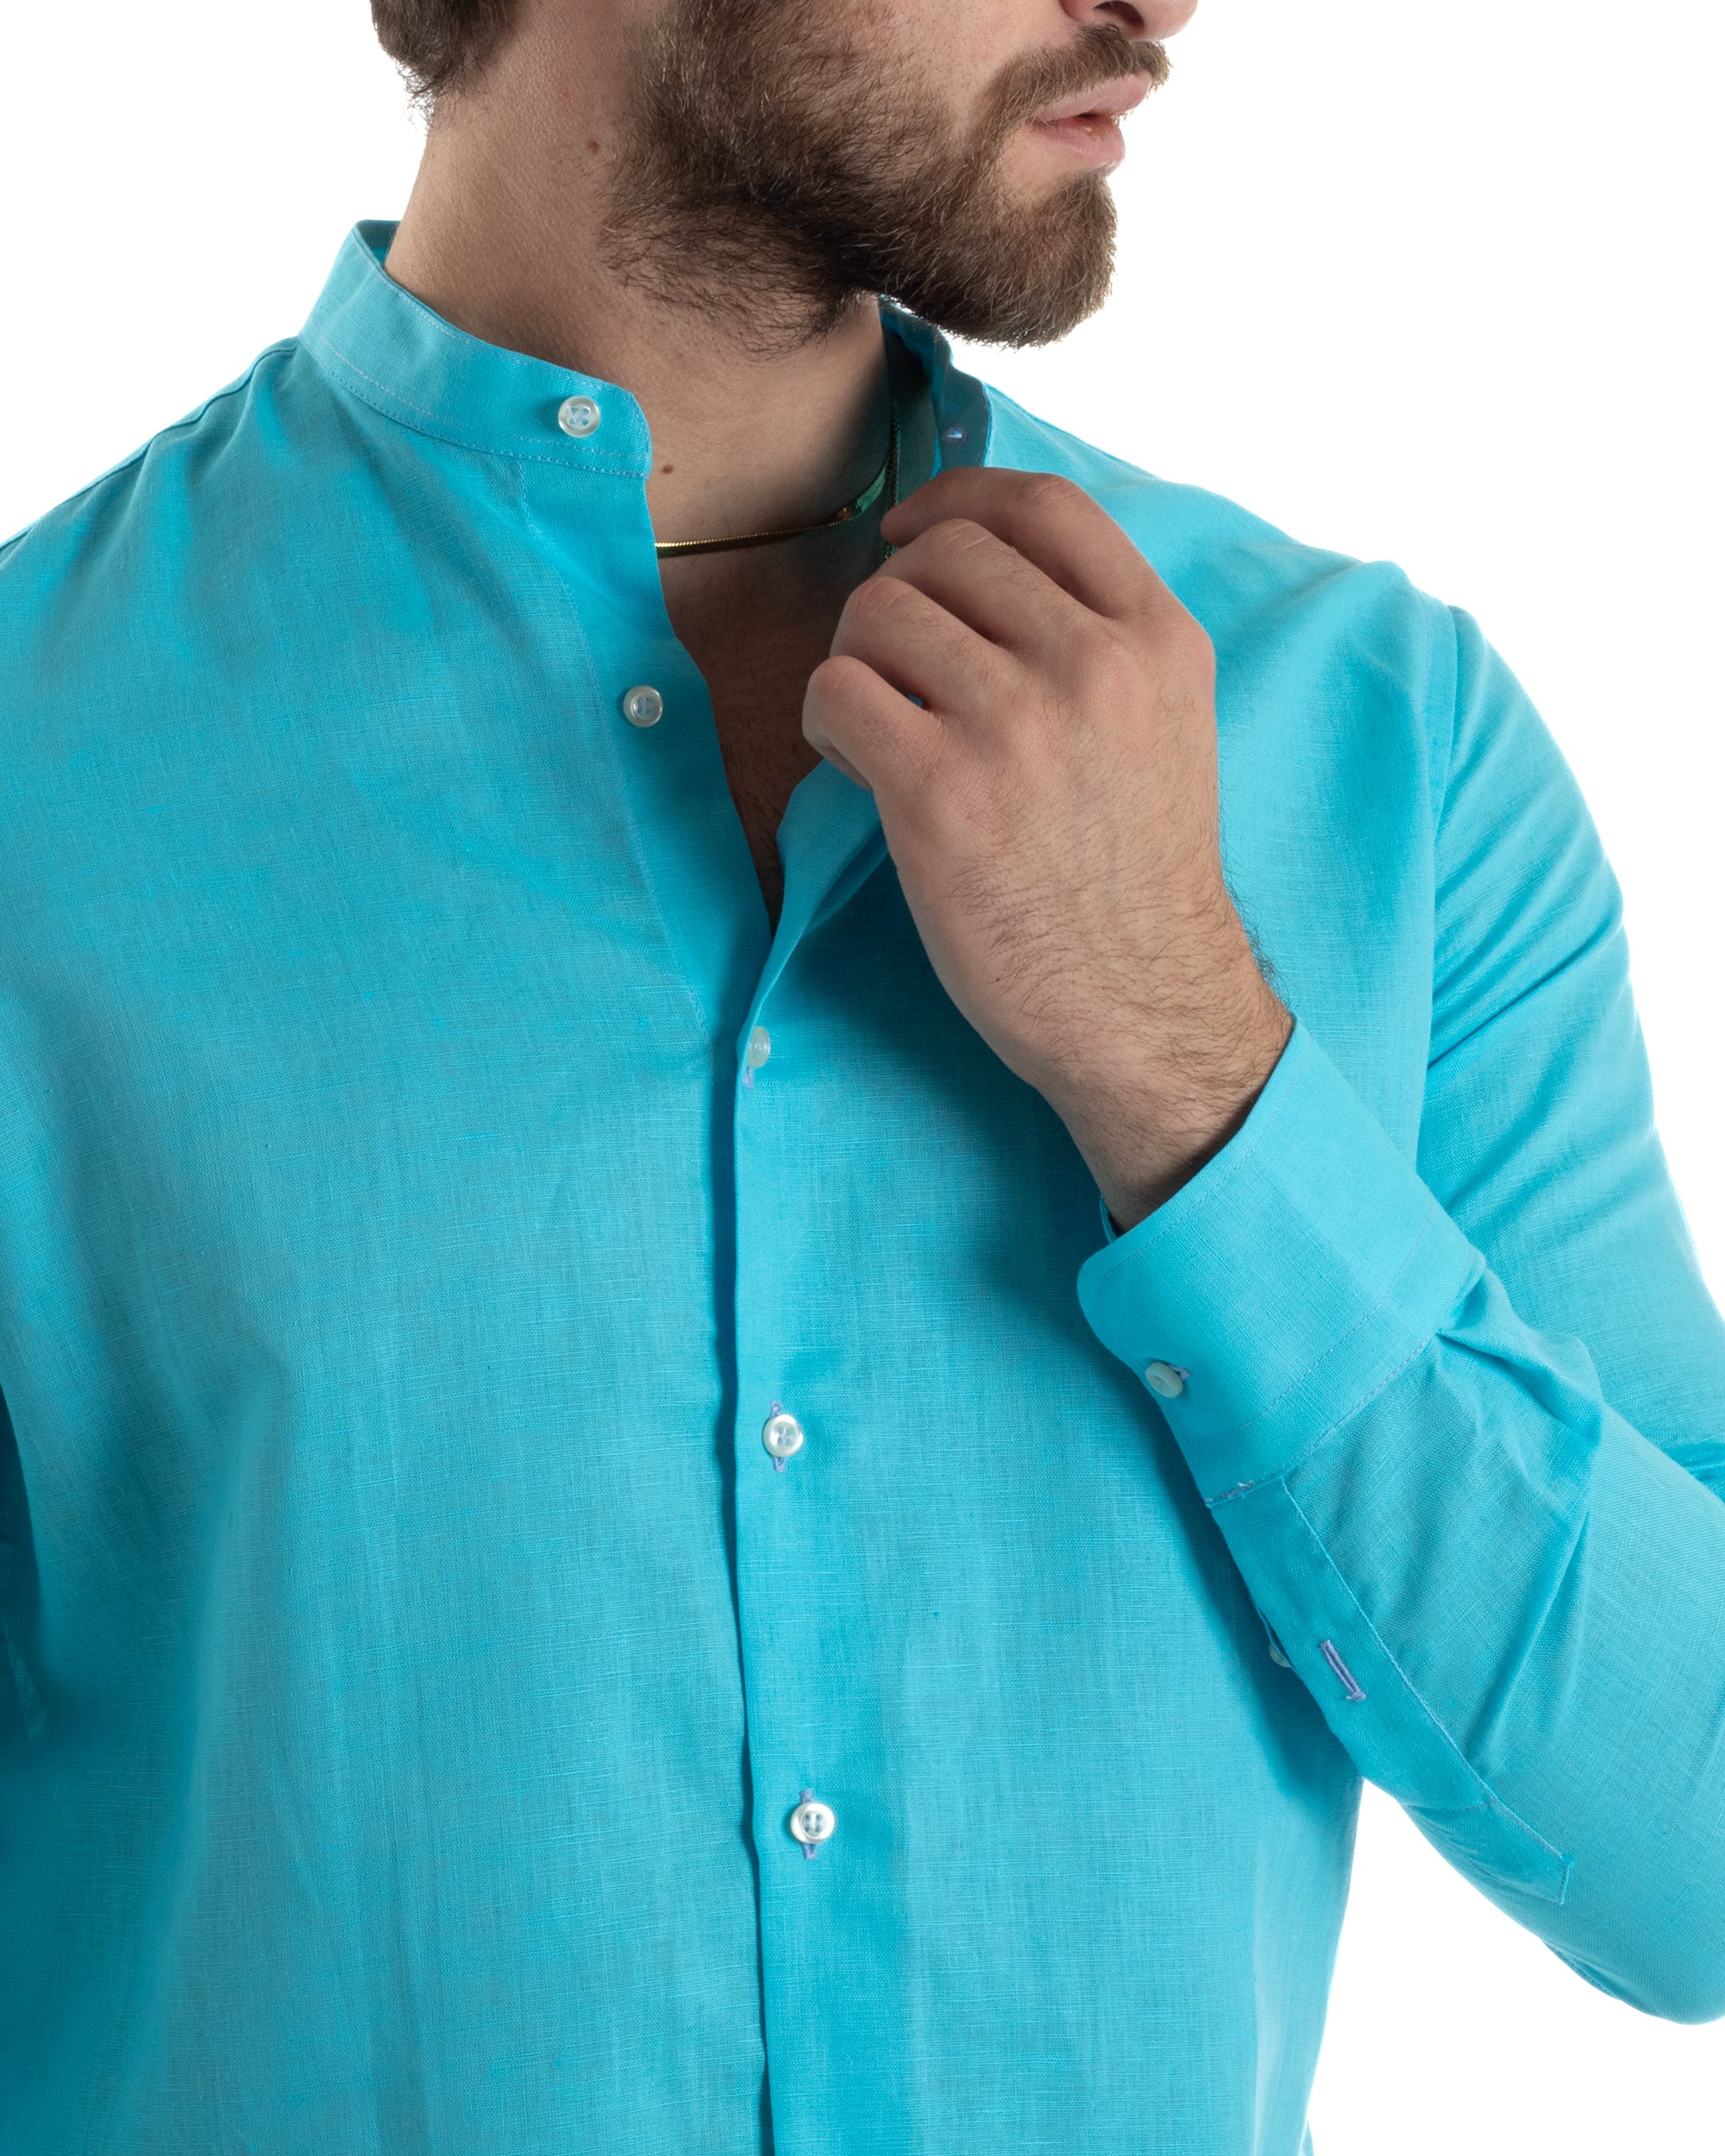 Men's Mandarin Collar Shirt Long Sleeve Linen Solid Color Tailored Turquoise GIOSAL-C2678A